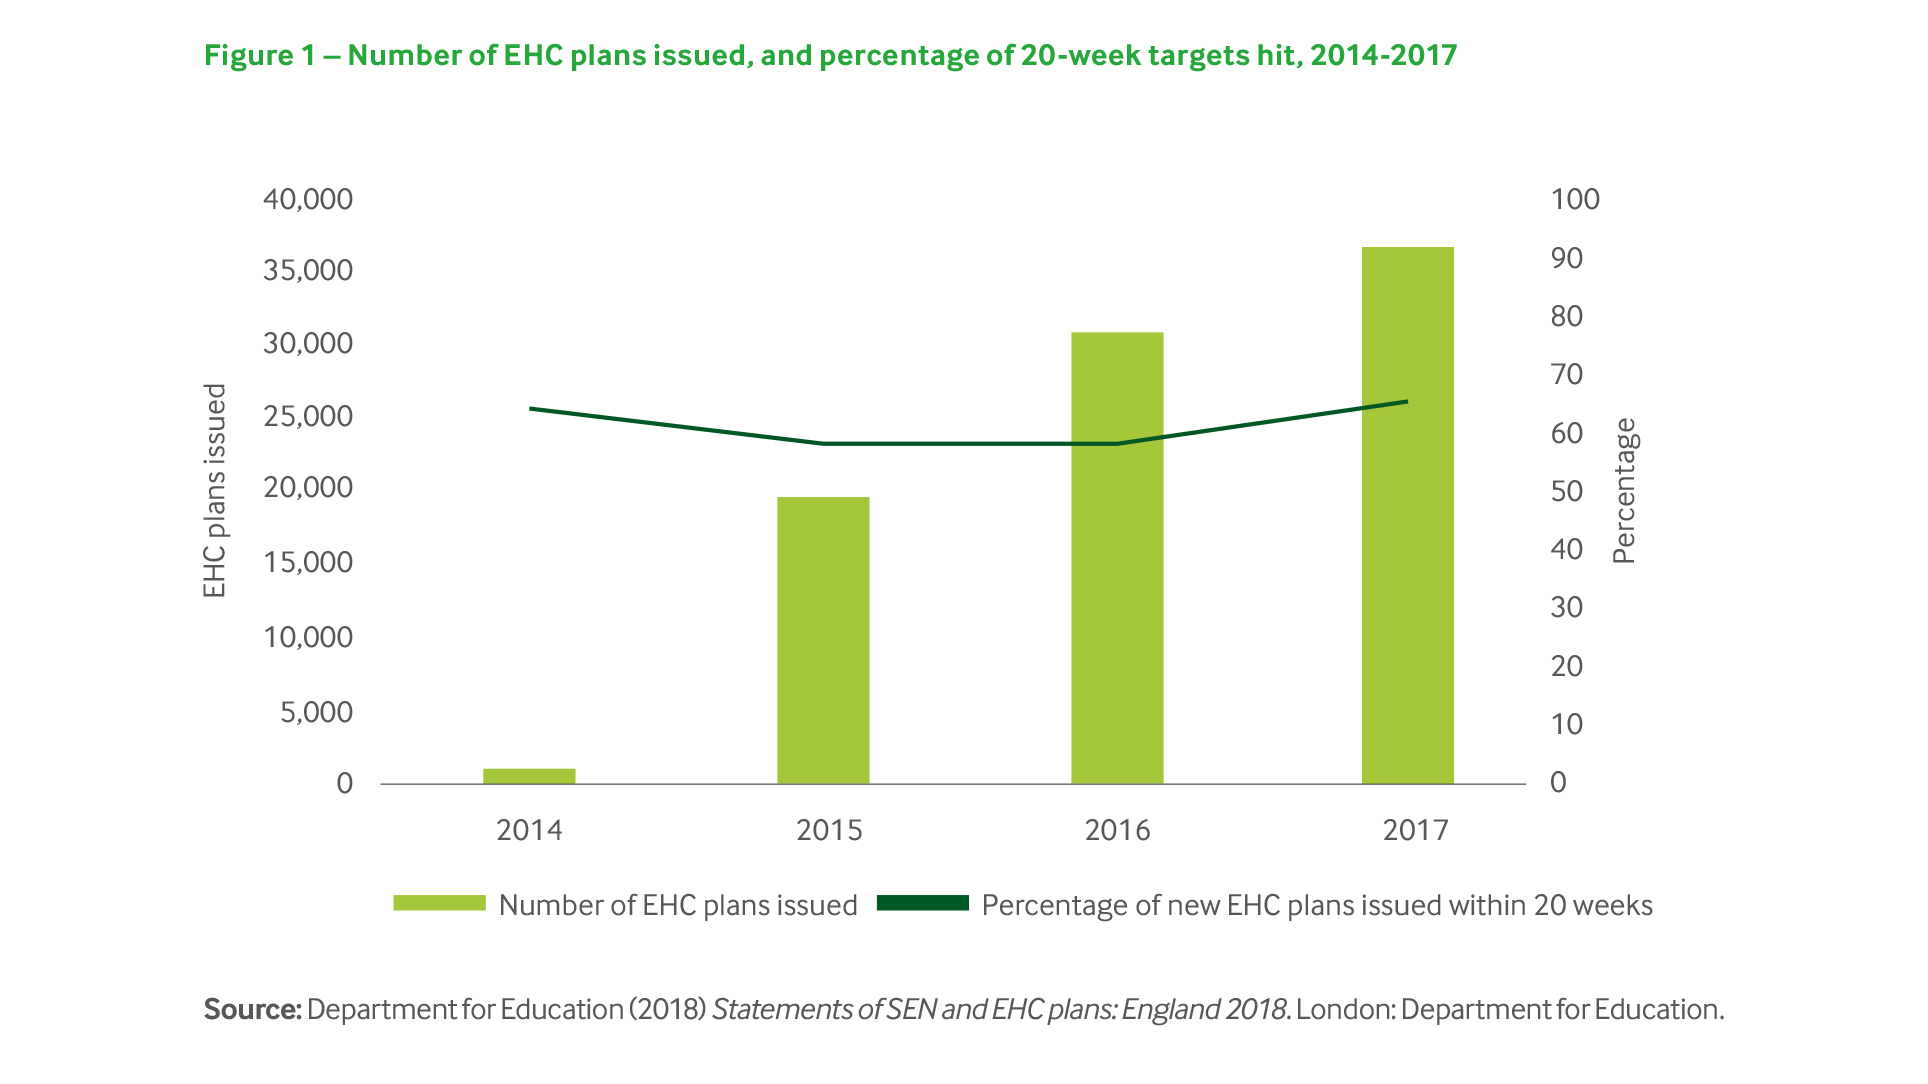 A graph showing the number of EHC plans issued and percentage of 20-week targets hit between 2014-2017